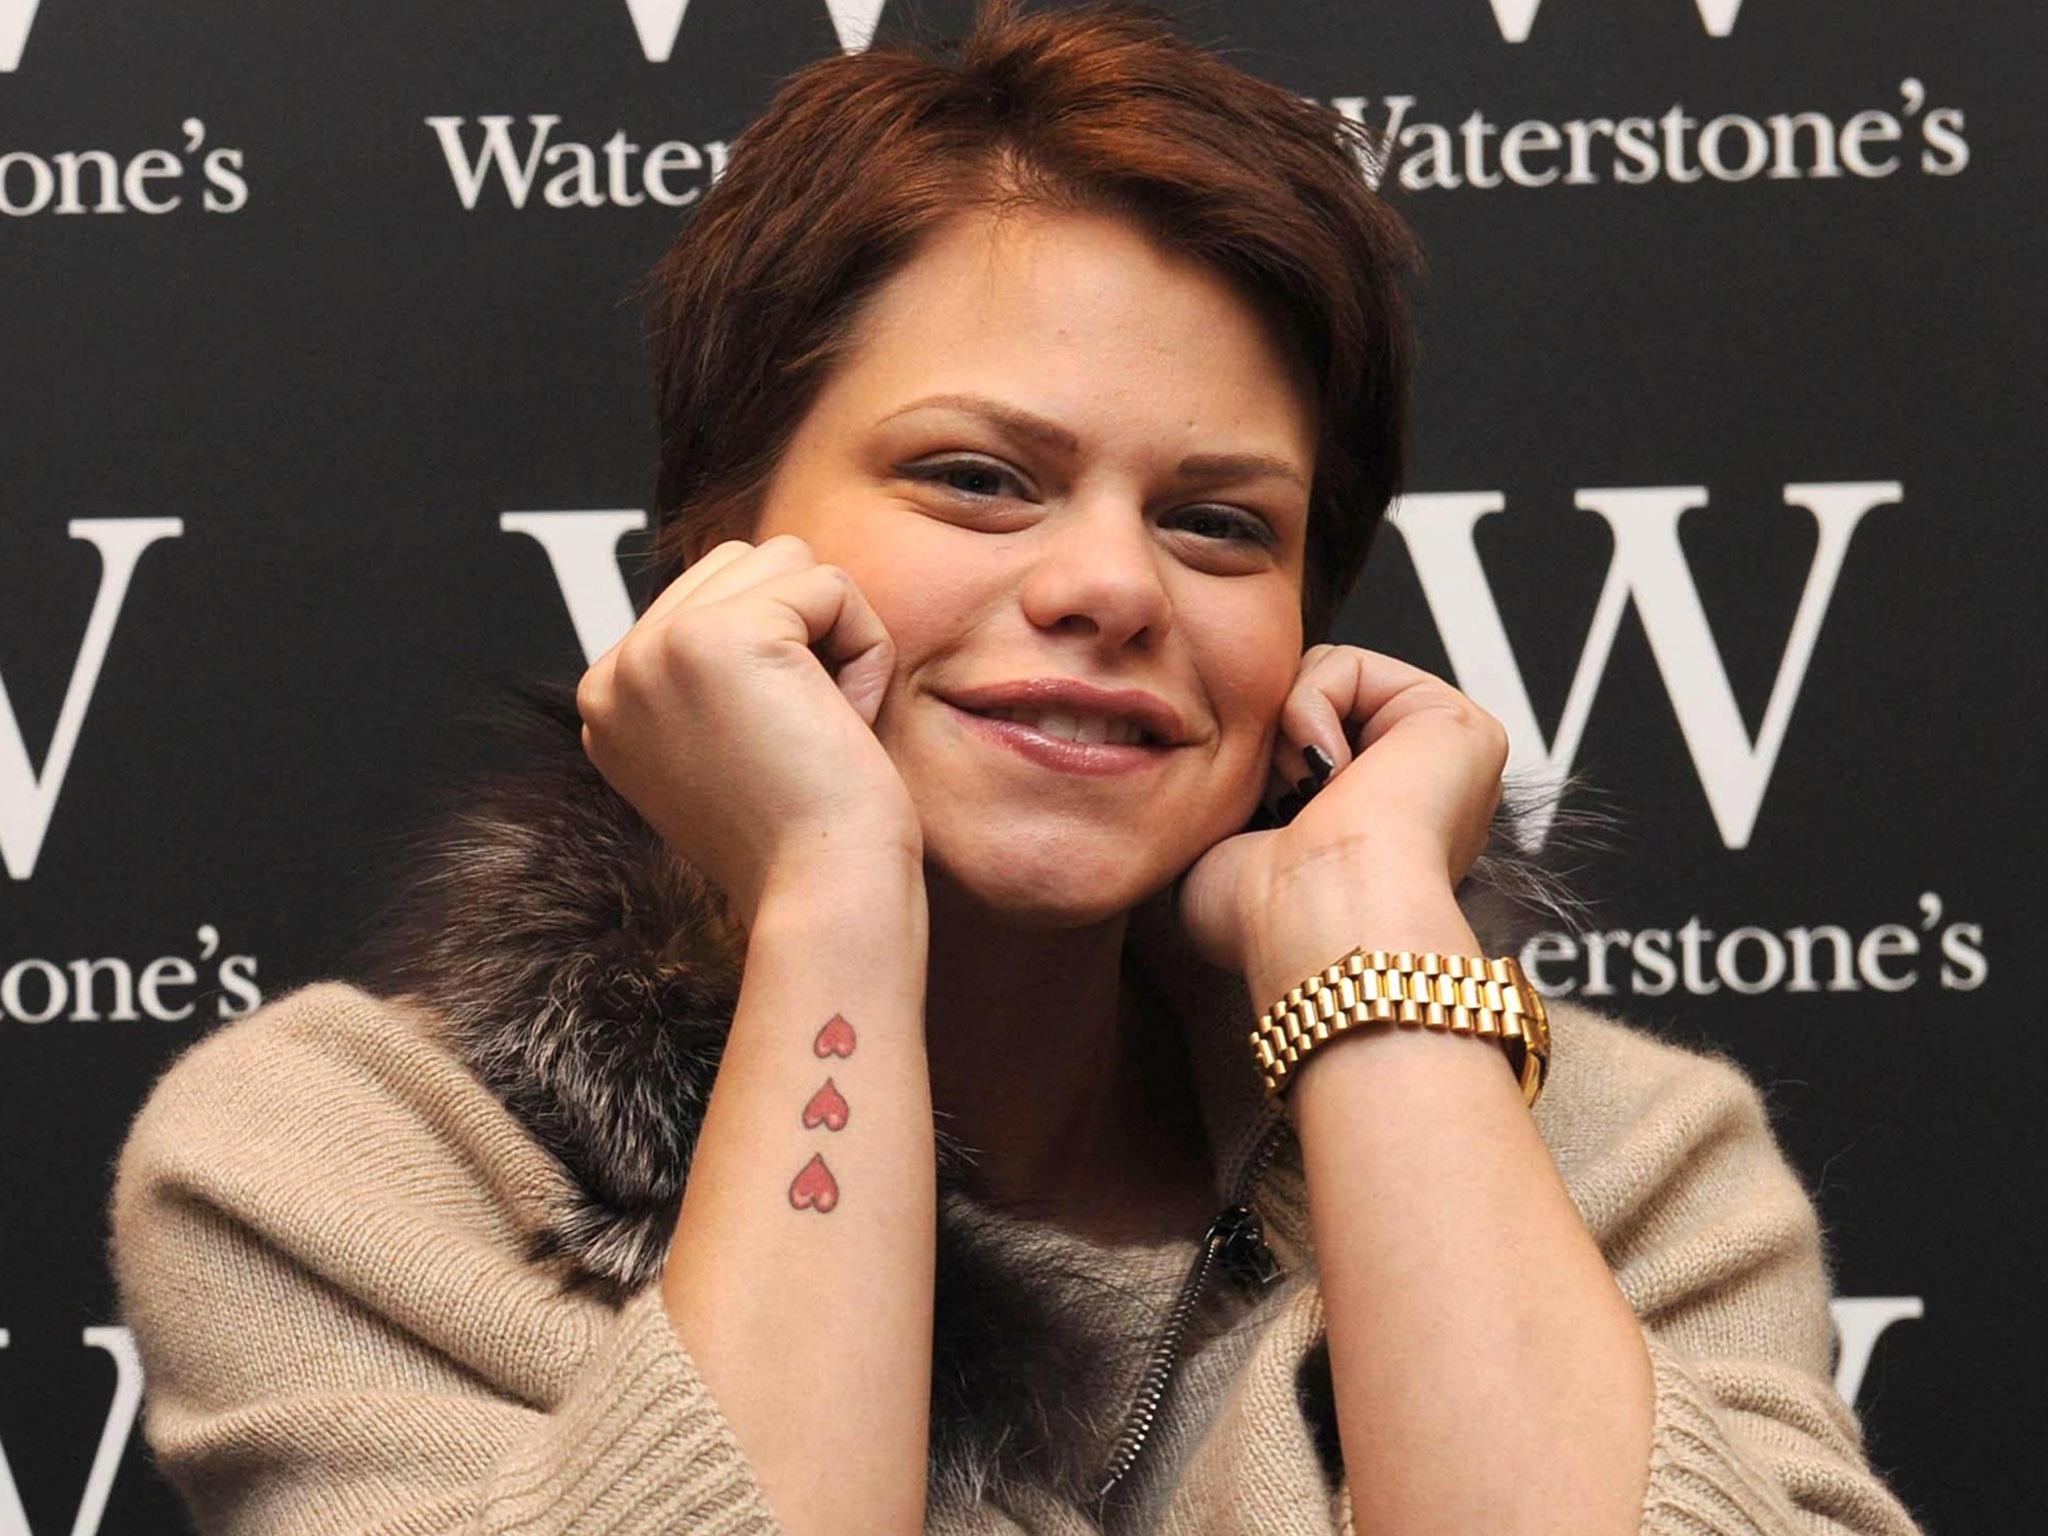 Jade Goody: by 2007 she had published two autobiographies and launched her own perfume